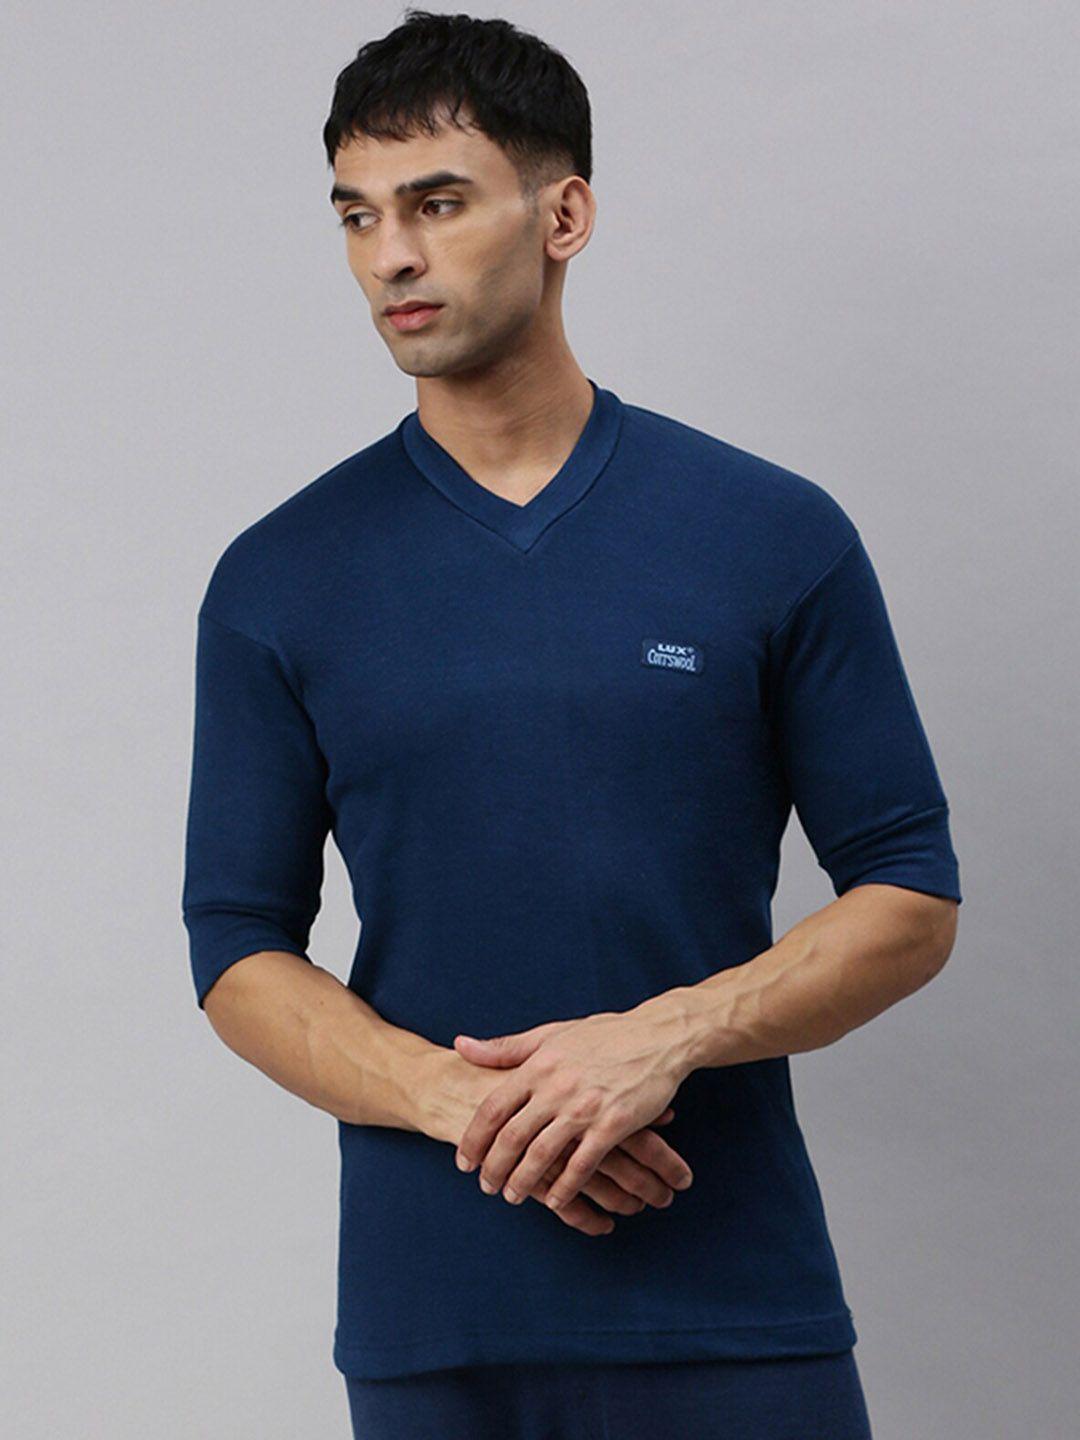 lux-cottswool-v-neck-short-sleeves-thermal-top